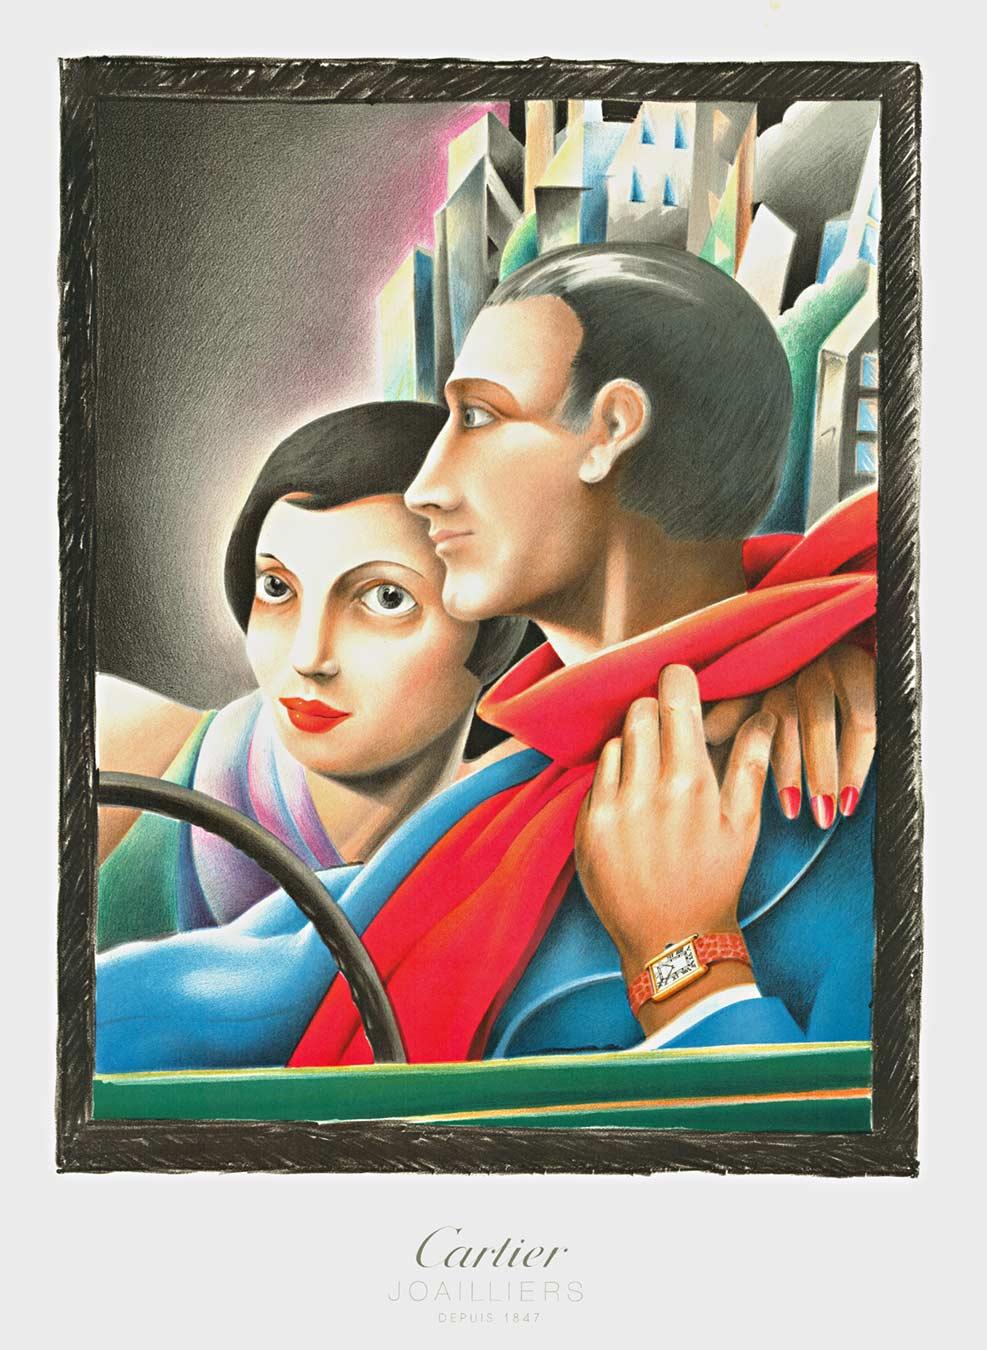 Unknown Figurative Print - Original Cartier Joailliers Couple (Watches) vintage poster